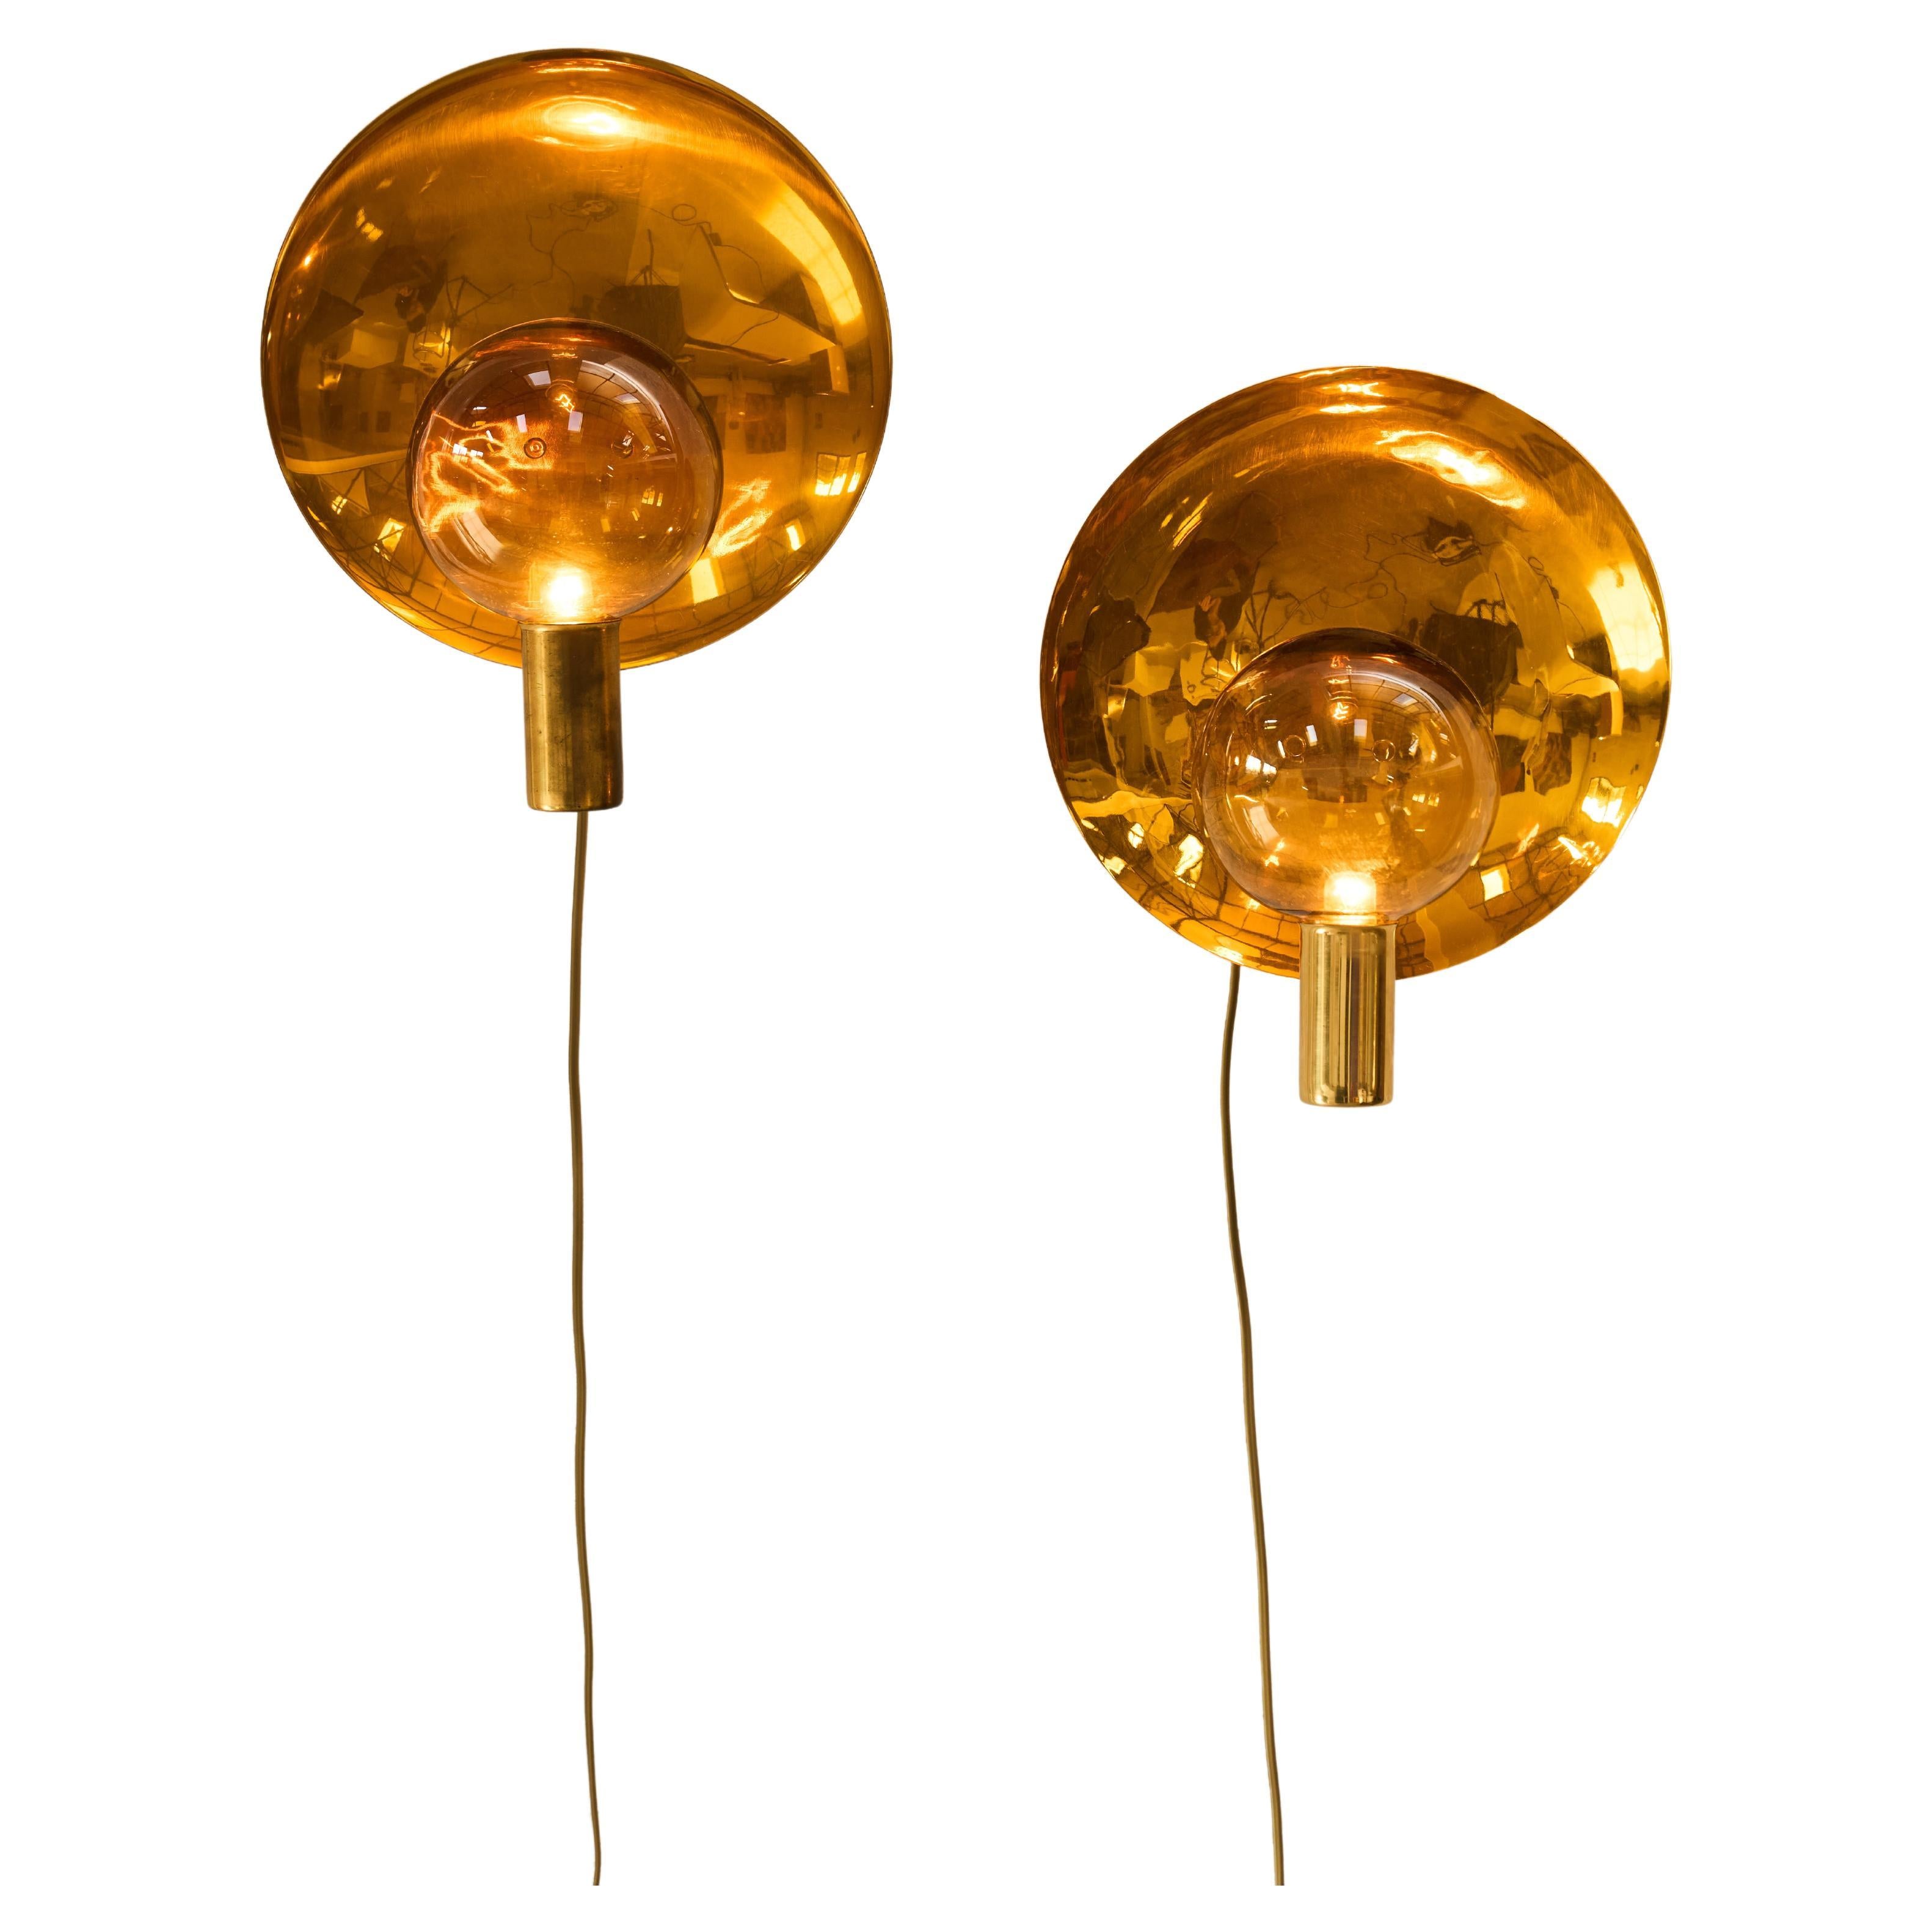 HANS AGNE JAKOBSSON V180 pair of wall lamps